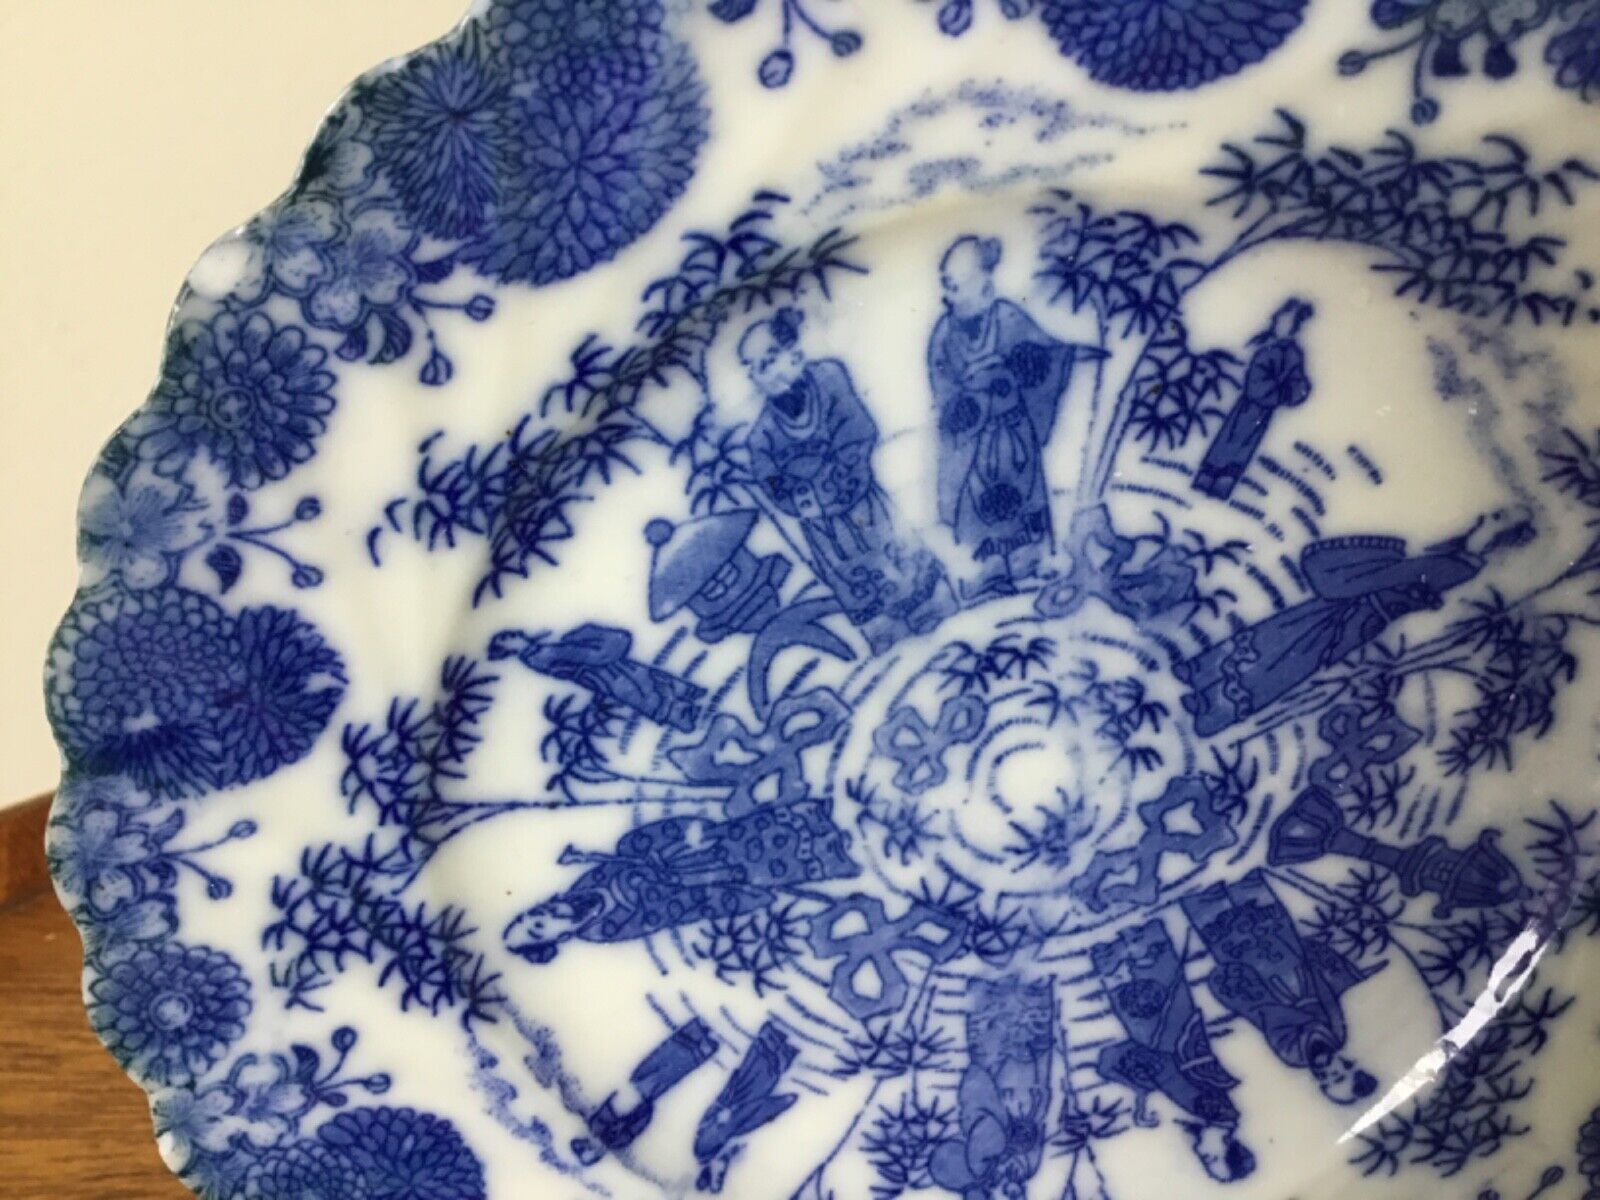  Antique Asian /Chines /Japanese 4 Blue & White Plates Decorated w Sages 6 1/4” Без бренда - фотография #10